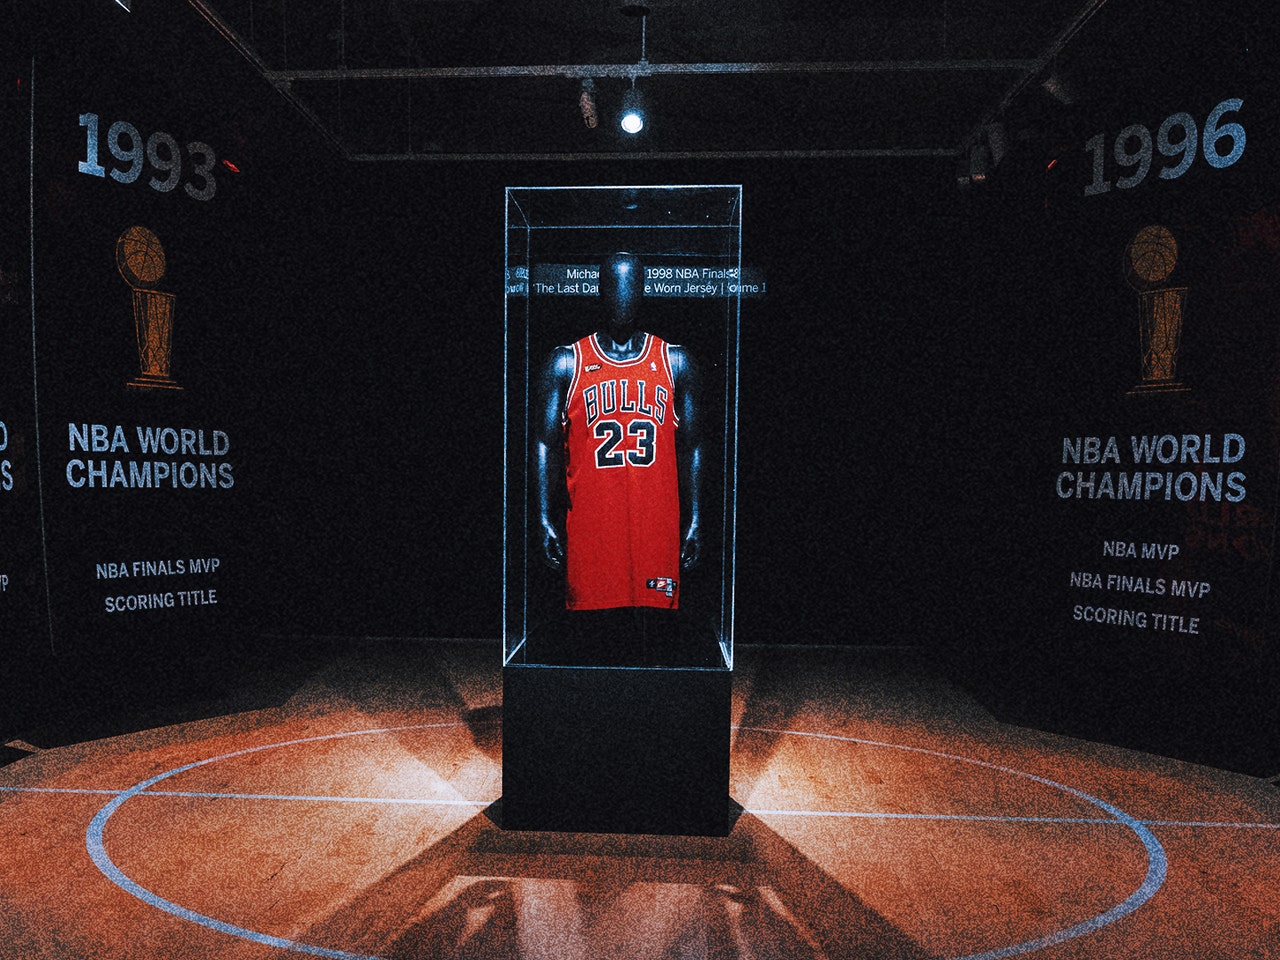 LeBron James championship jersey sells for millions